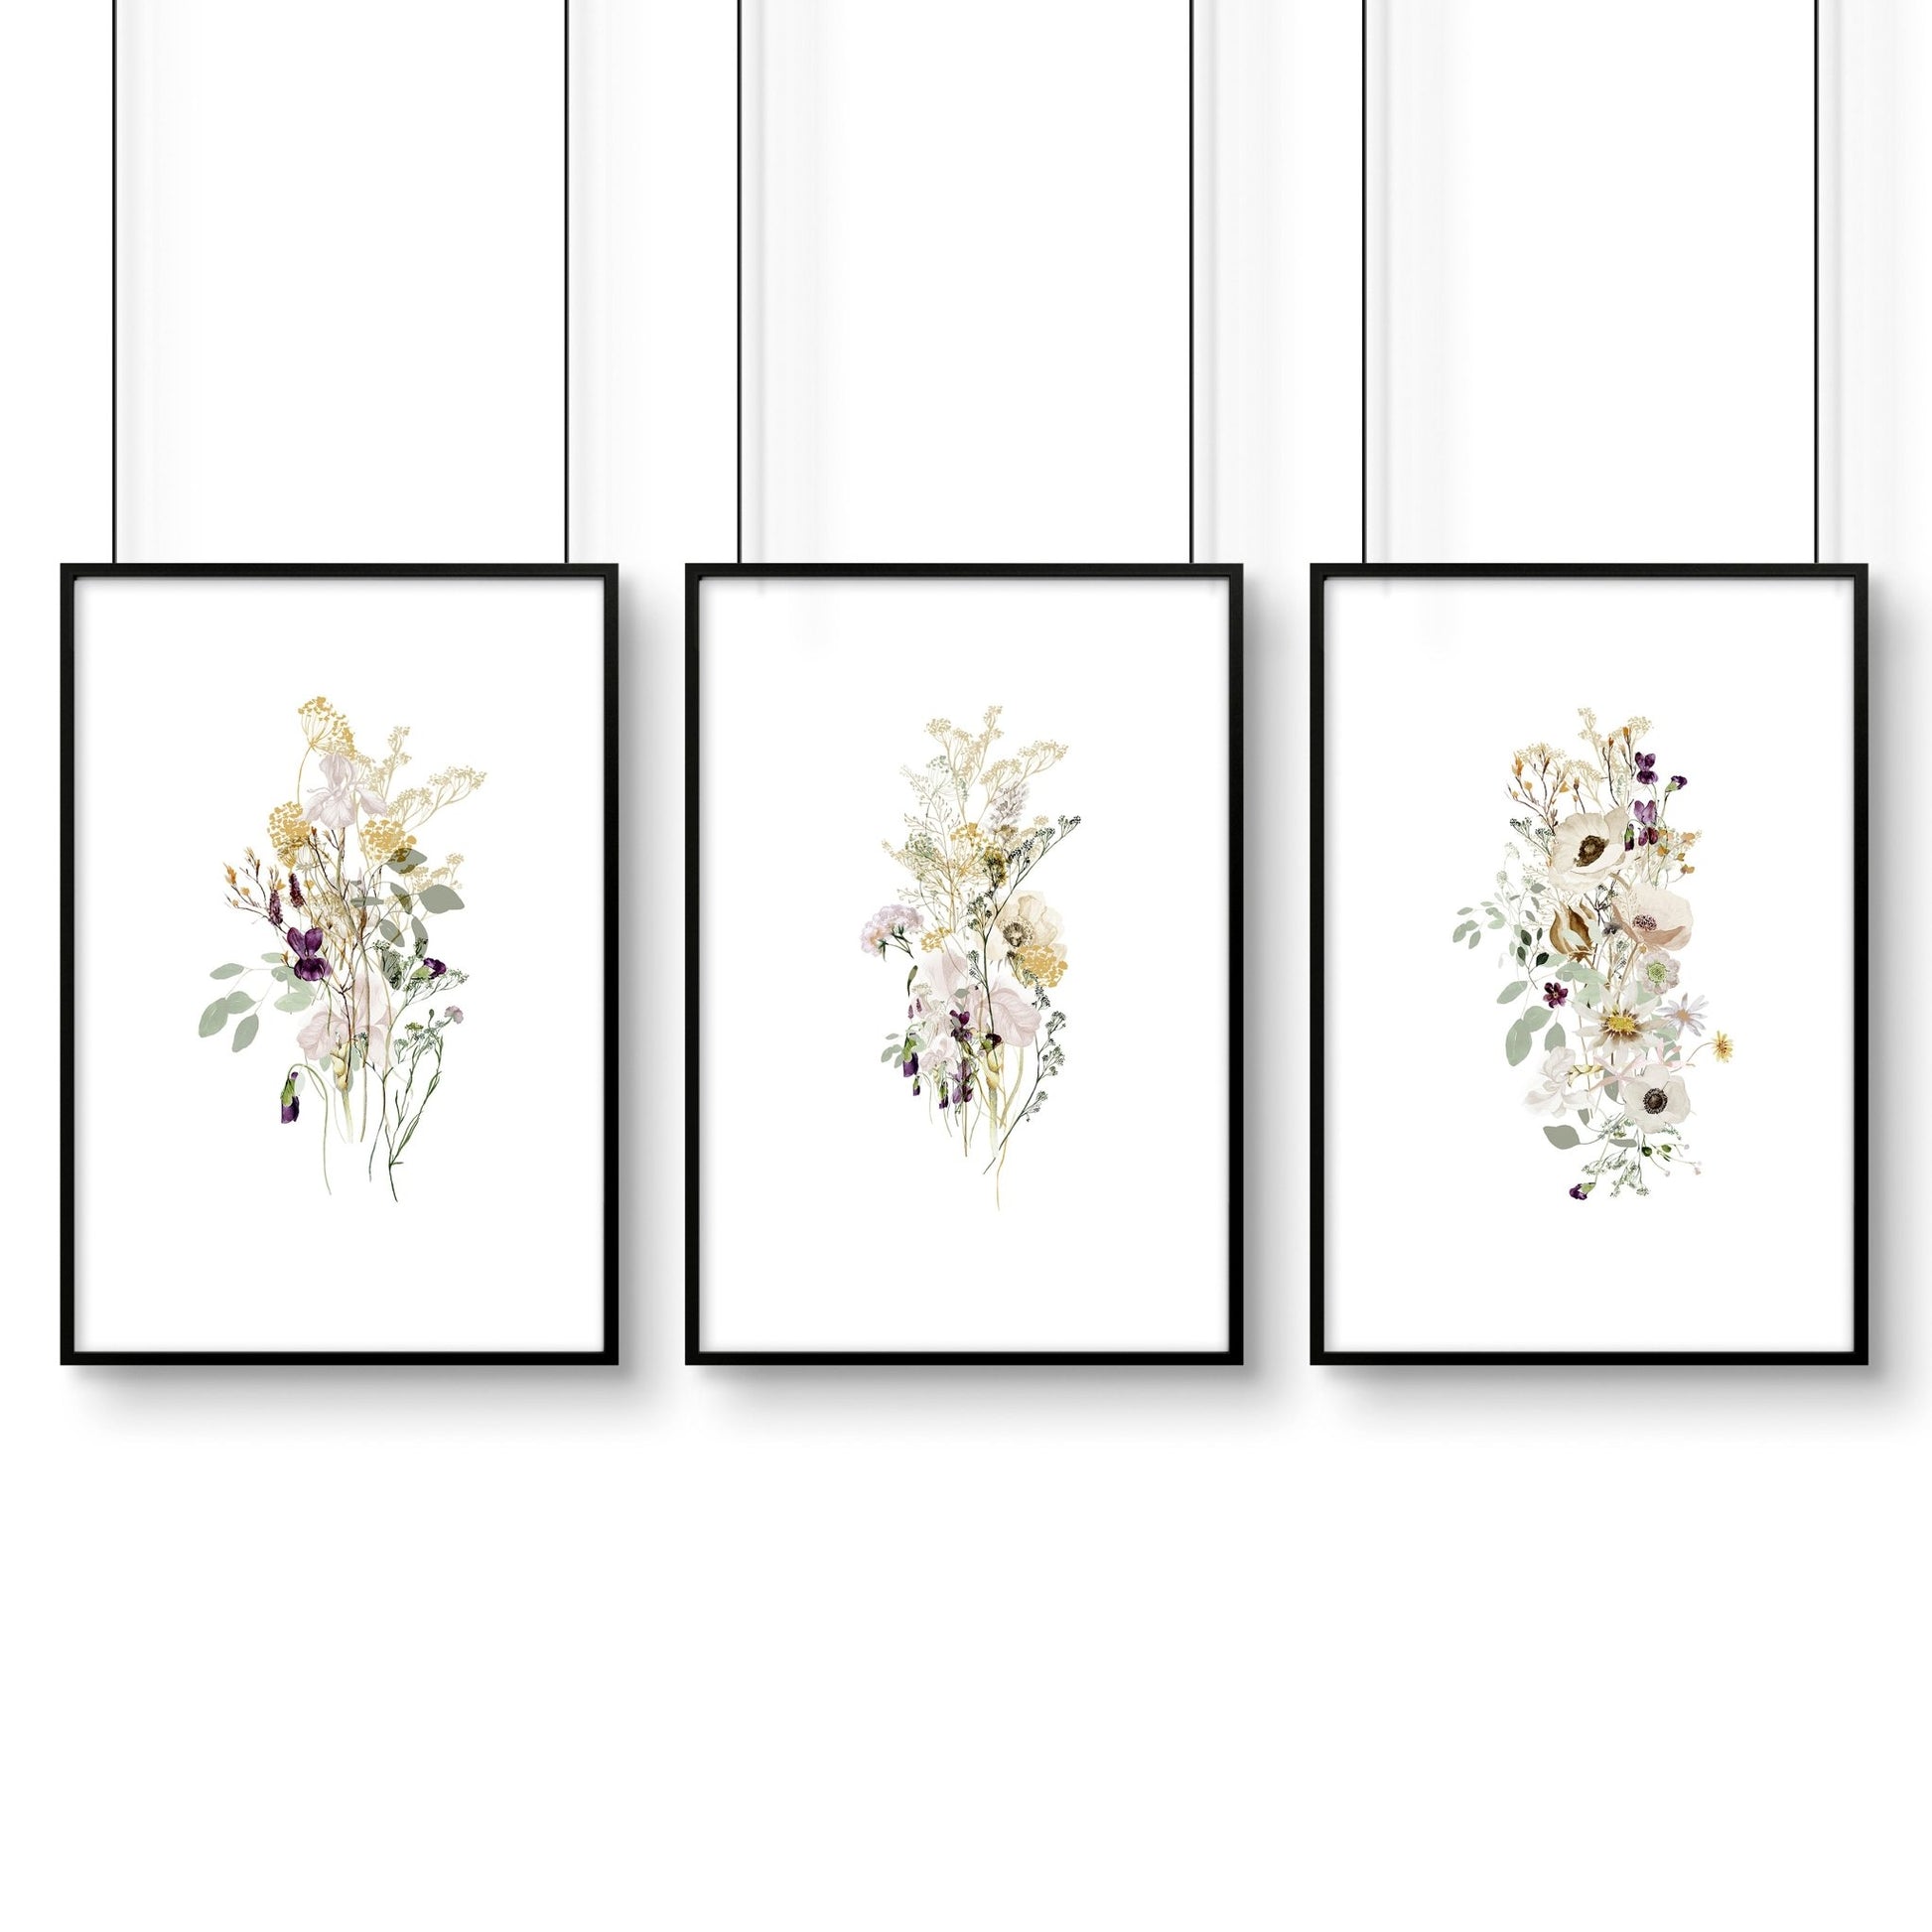 Floral Prints for bathroom decor | Set of 3 wall art prints - About Wall Art